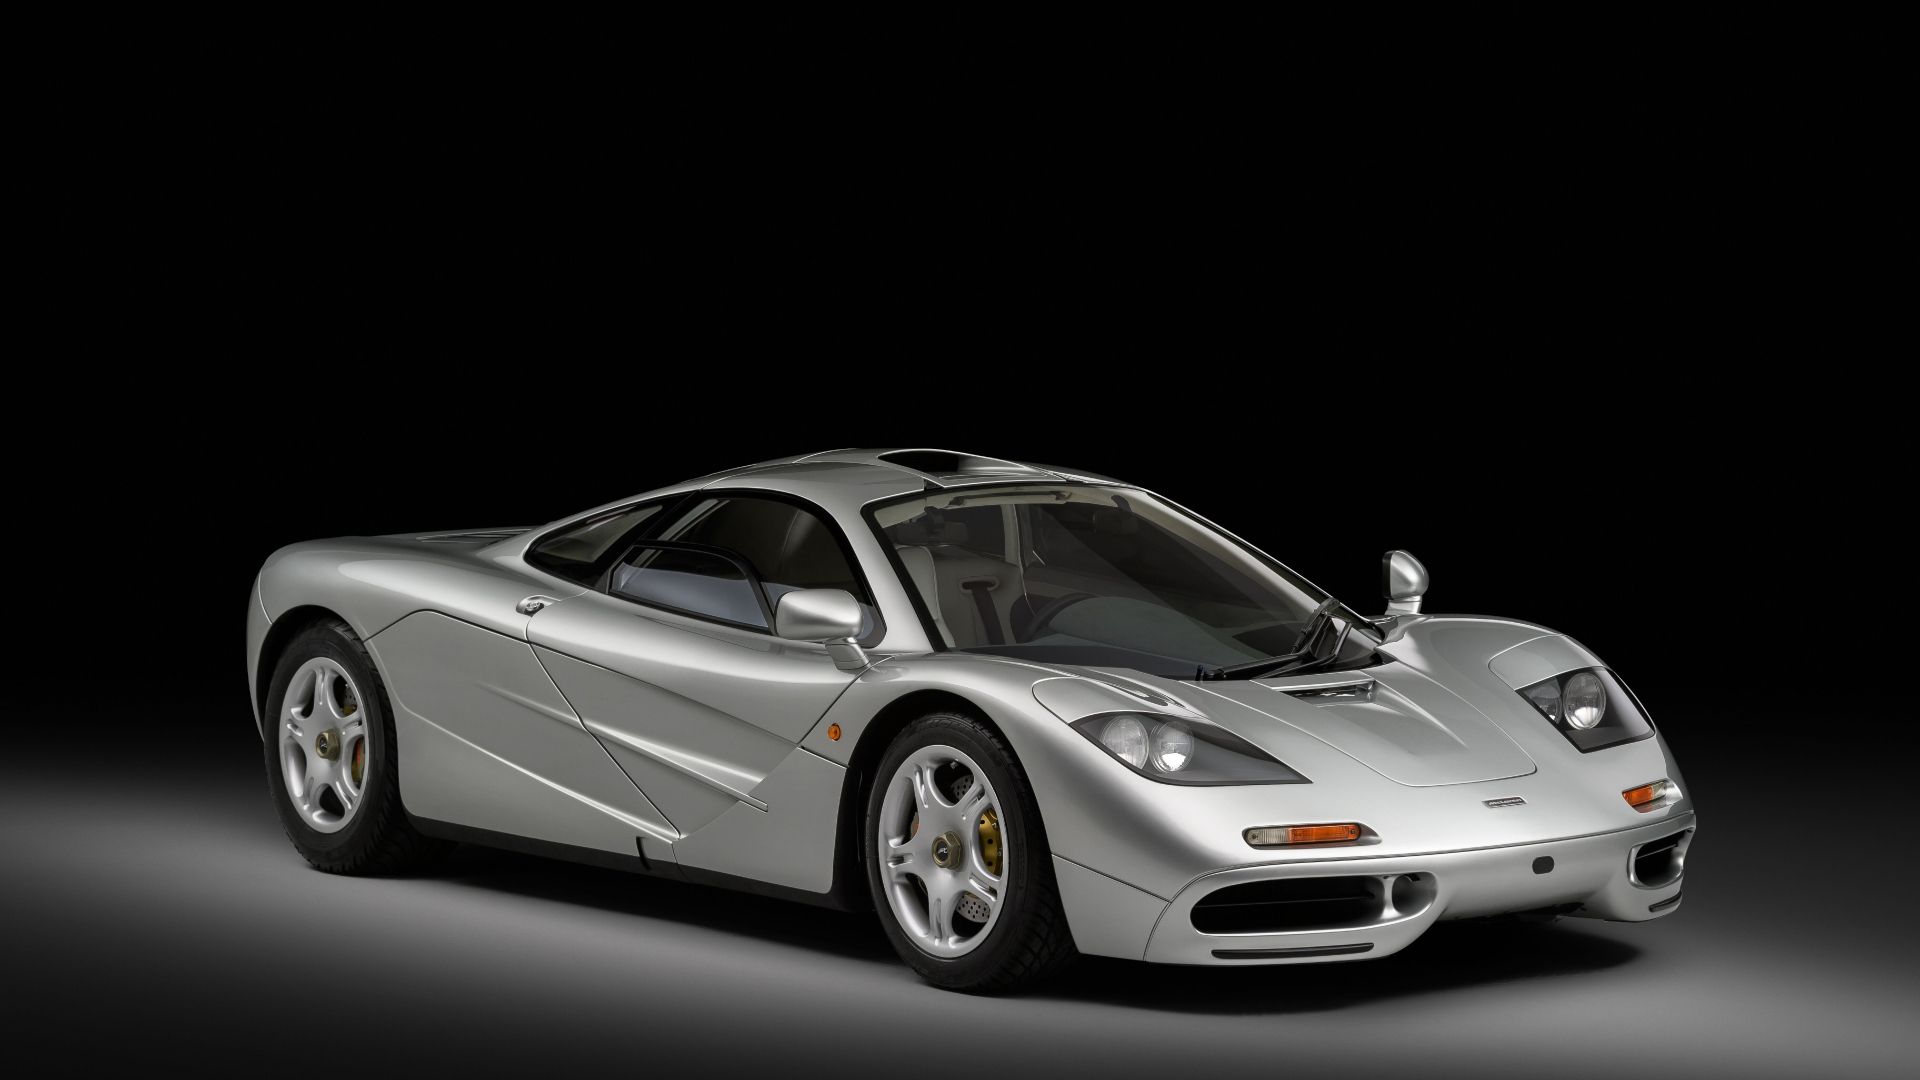 10 Facts You Didn't Know About The Legendary McLaren F1